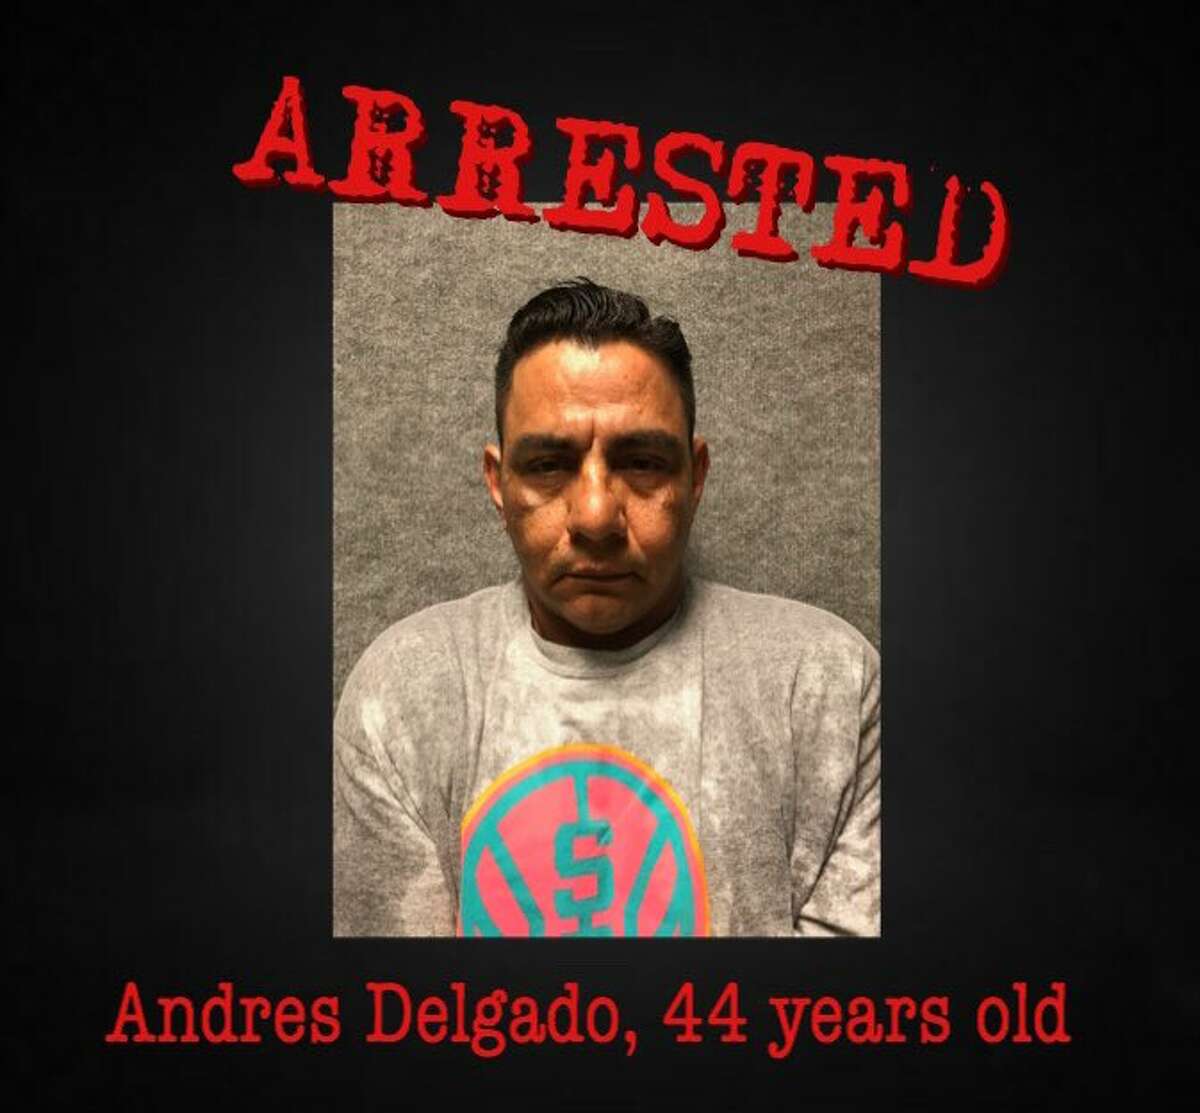 Officers with SWAT & the Repeat Offender Program (ROP) arrested 44-year-old Andres Delgado in connection with the death of his 14-year-old son. The incident occurred March 14, 2018 in the 100 block of Aransas. Delgado, who was arrested on the city's west side without incident, will be charged with manslaughter.